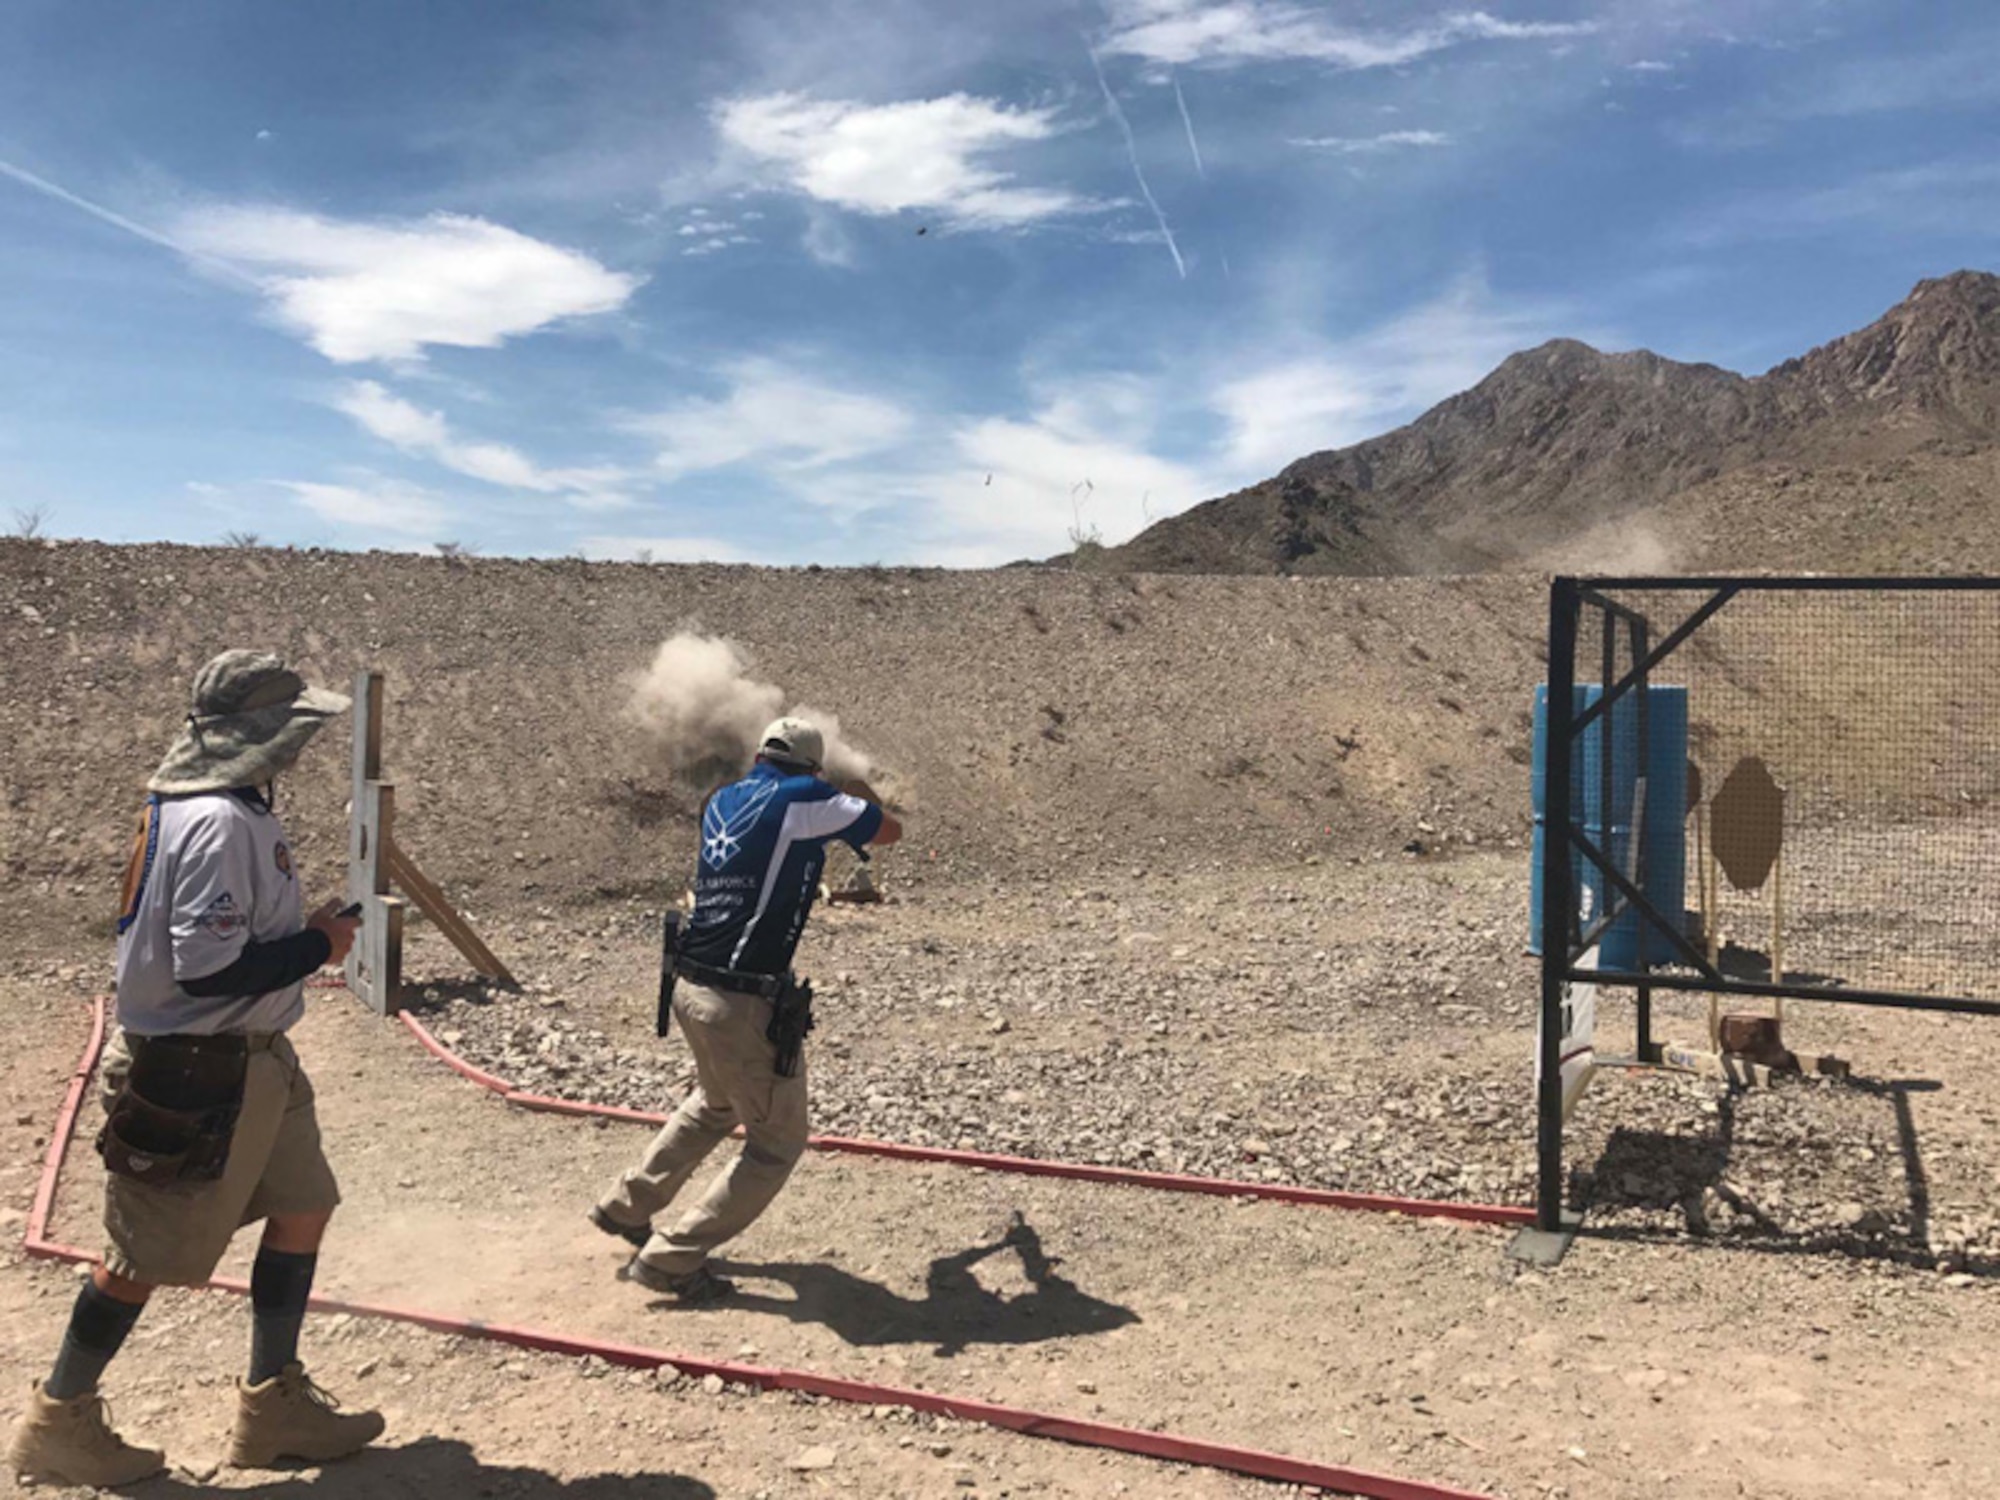 Tech Sgt. Eric Crotsley of the 552nd Maintenance Squadron at Tinker Air Force Base, Oklahoma, competes in the open division of the Multigun Nationals on April 12-17 in Boulder City, Nevada. Crotsley finished 11th. 